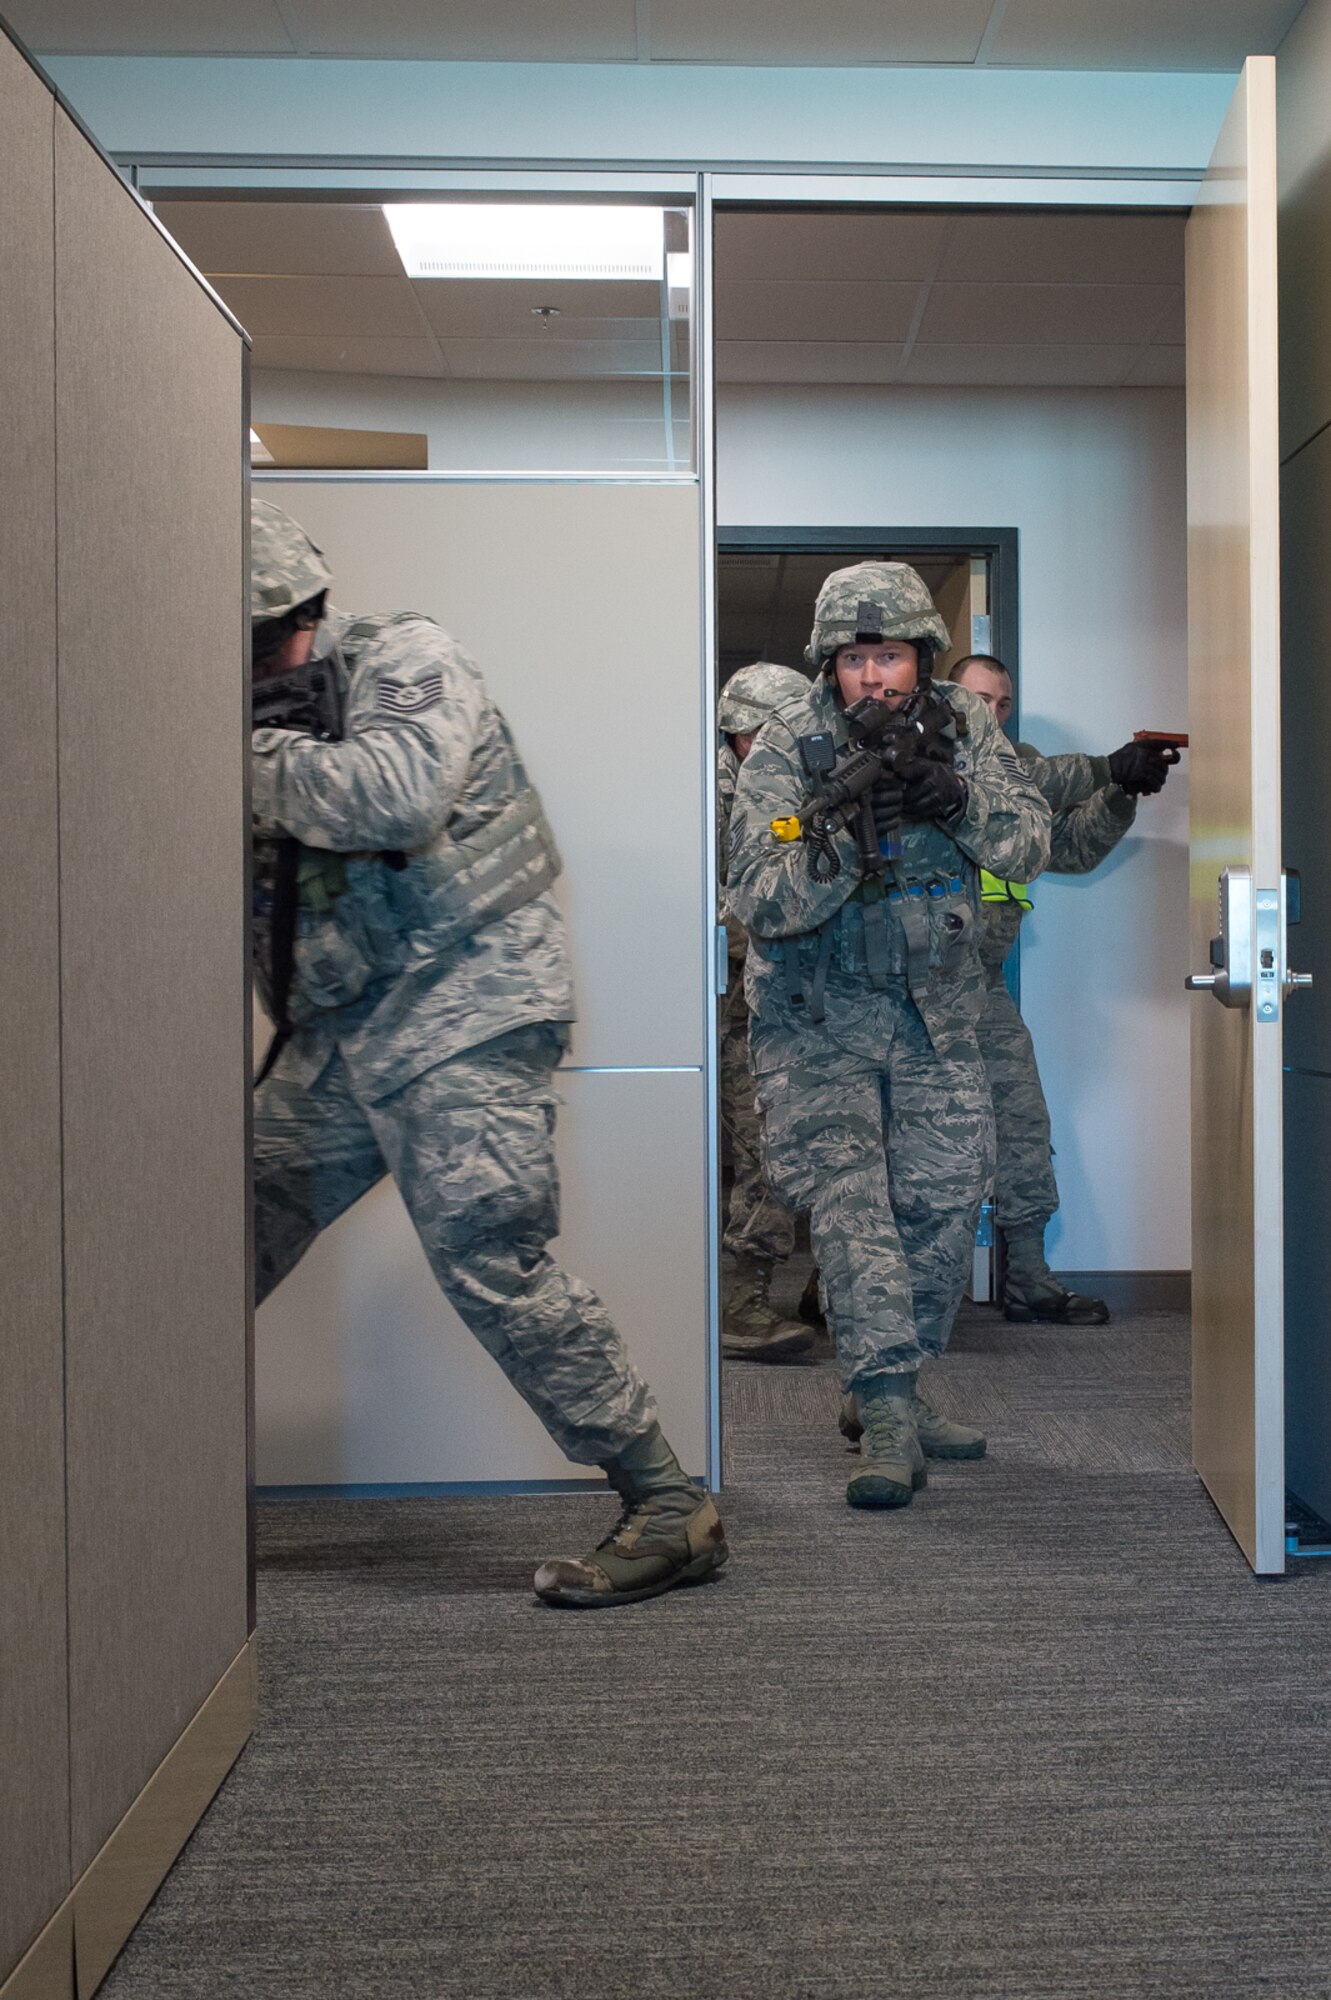 U.S. Air Force Tech. Sgt. Kenneth Paul clears a room in the 153rd Airlift Wing headquarters building Dec. 18, 2015 at Cheyenne Air National Guard base in Cheyenne, Wyoming. Paul and other security forces Airmen look for additional gunmen during an active shooter exercise. The scenario was in support of memorandum sent by Secretary of the Air Force Deborah James to test lockdown and active shooter procedures in response to shootings in Chattanooga, Tenn. (U.S. Air National Guard photo by Master Sgt. Charles Delano)